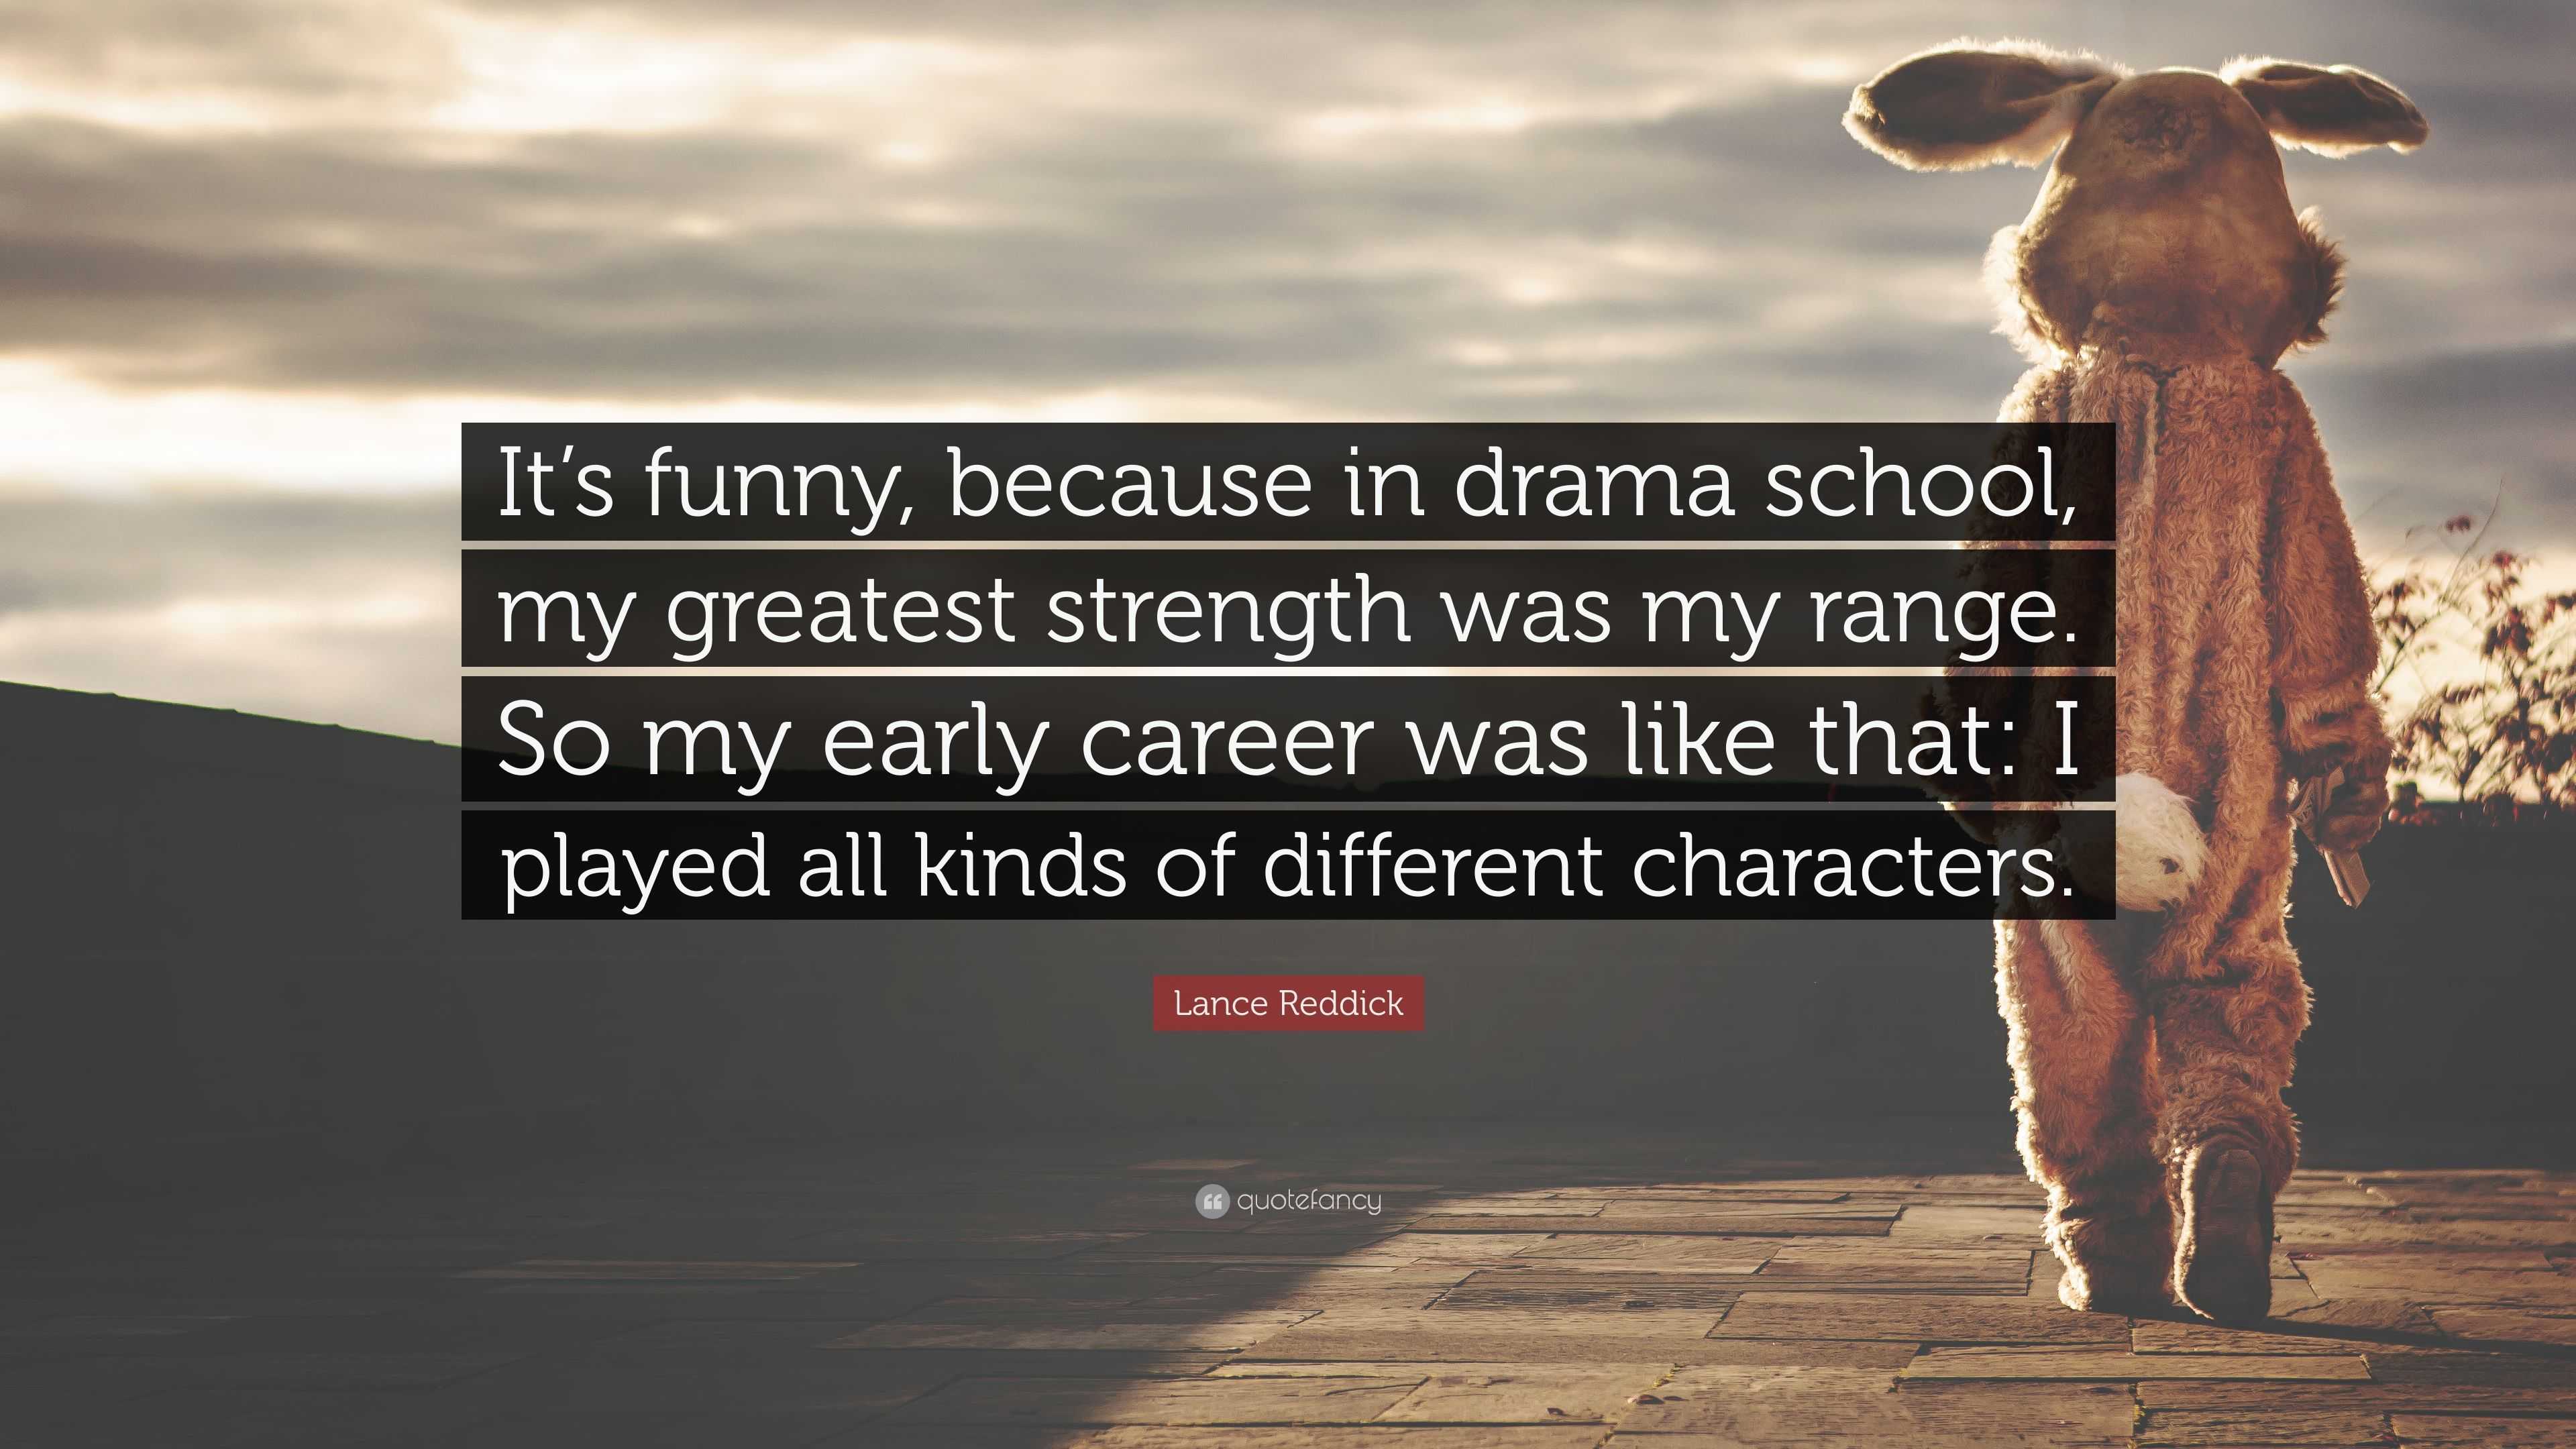 Lance Reddick Quote: “It's funny, because in drama school, my greatest  strength was my range. So my early career was like that: I played all k...”